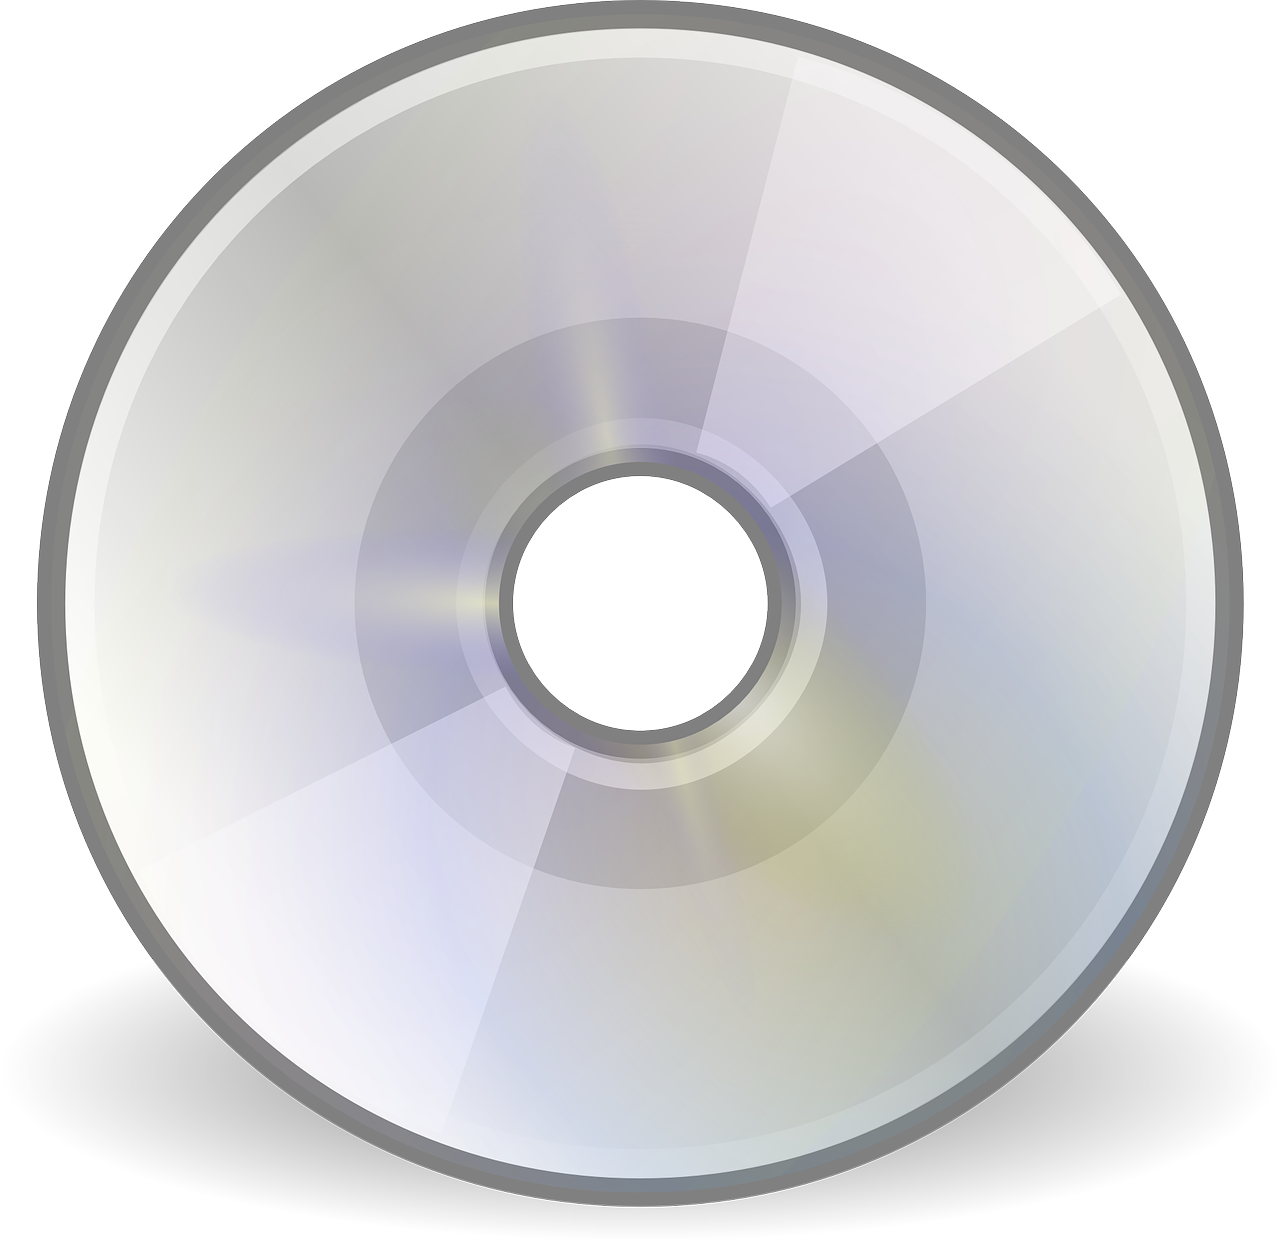 Vector Disk Silver Cd HD Image Free PNG Image